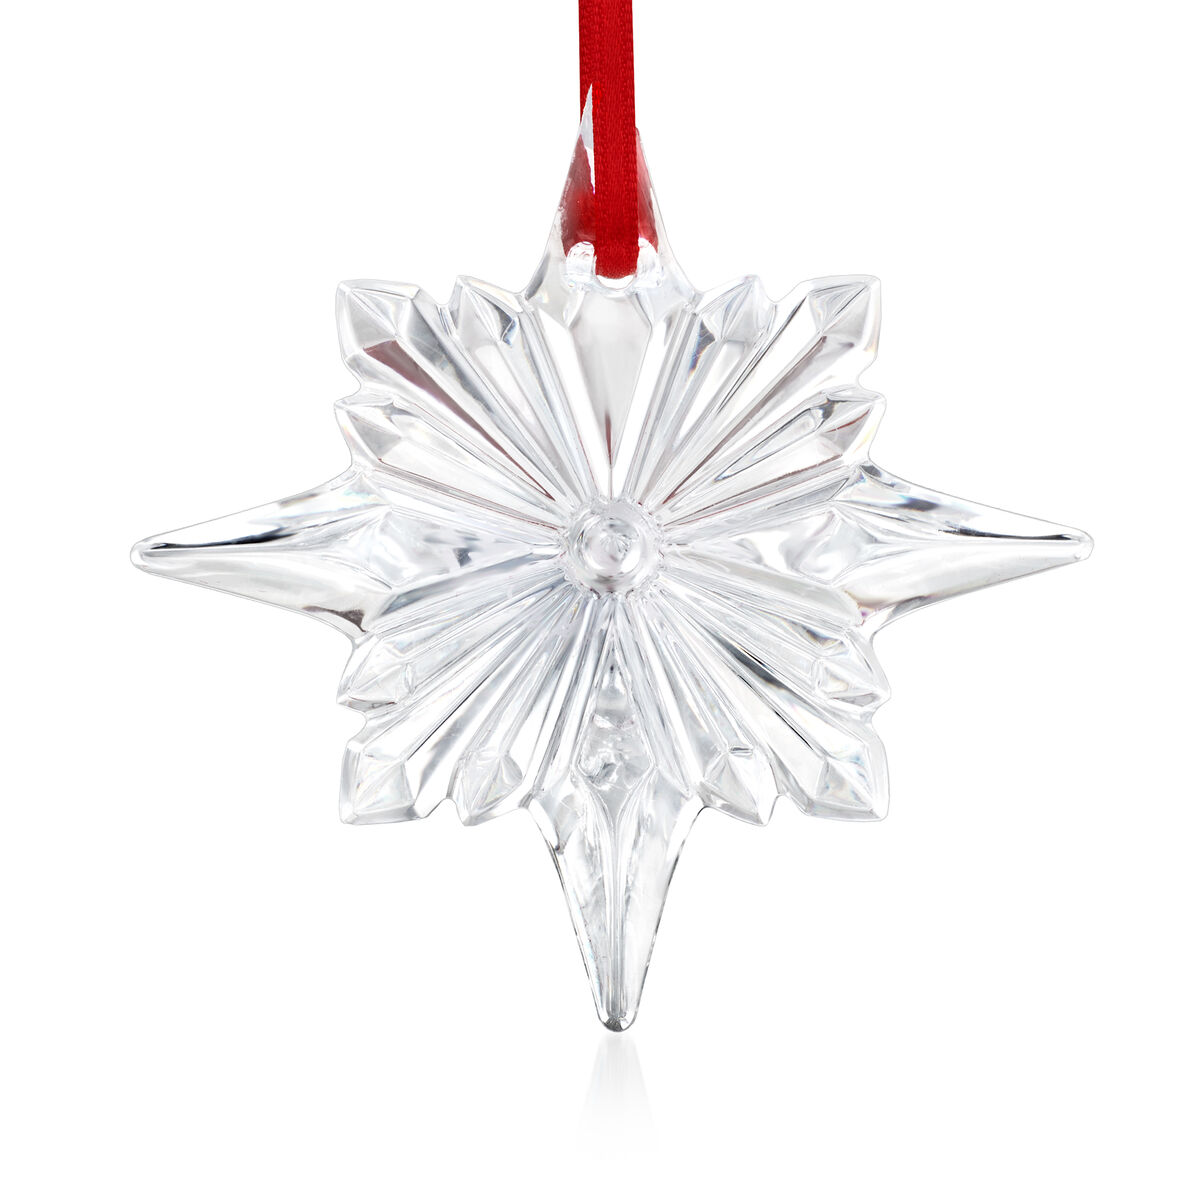 Baccarat 2023 Annual Crystal Ornament | Ross-Simons